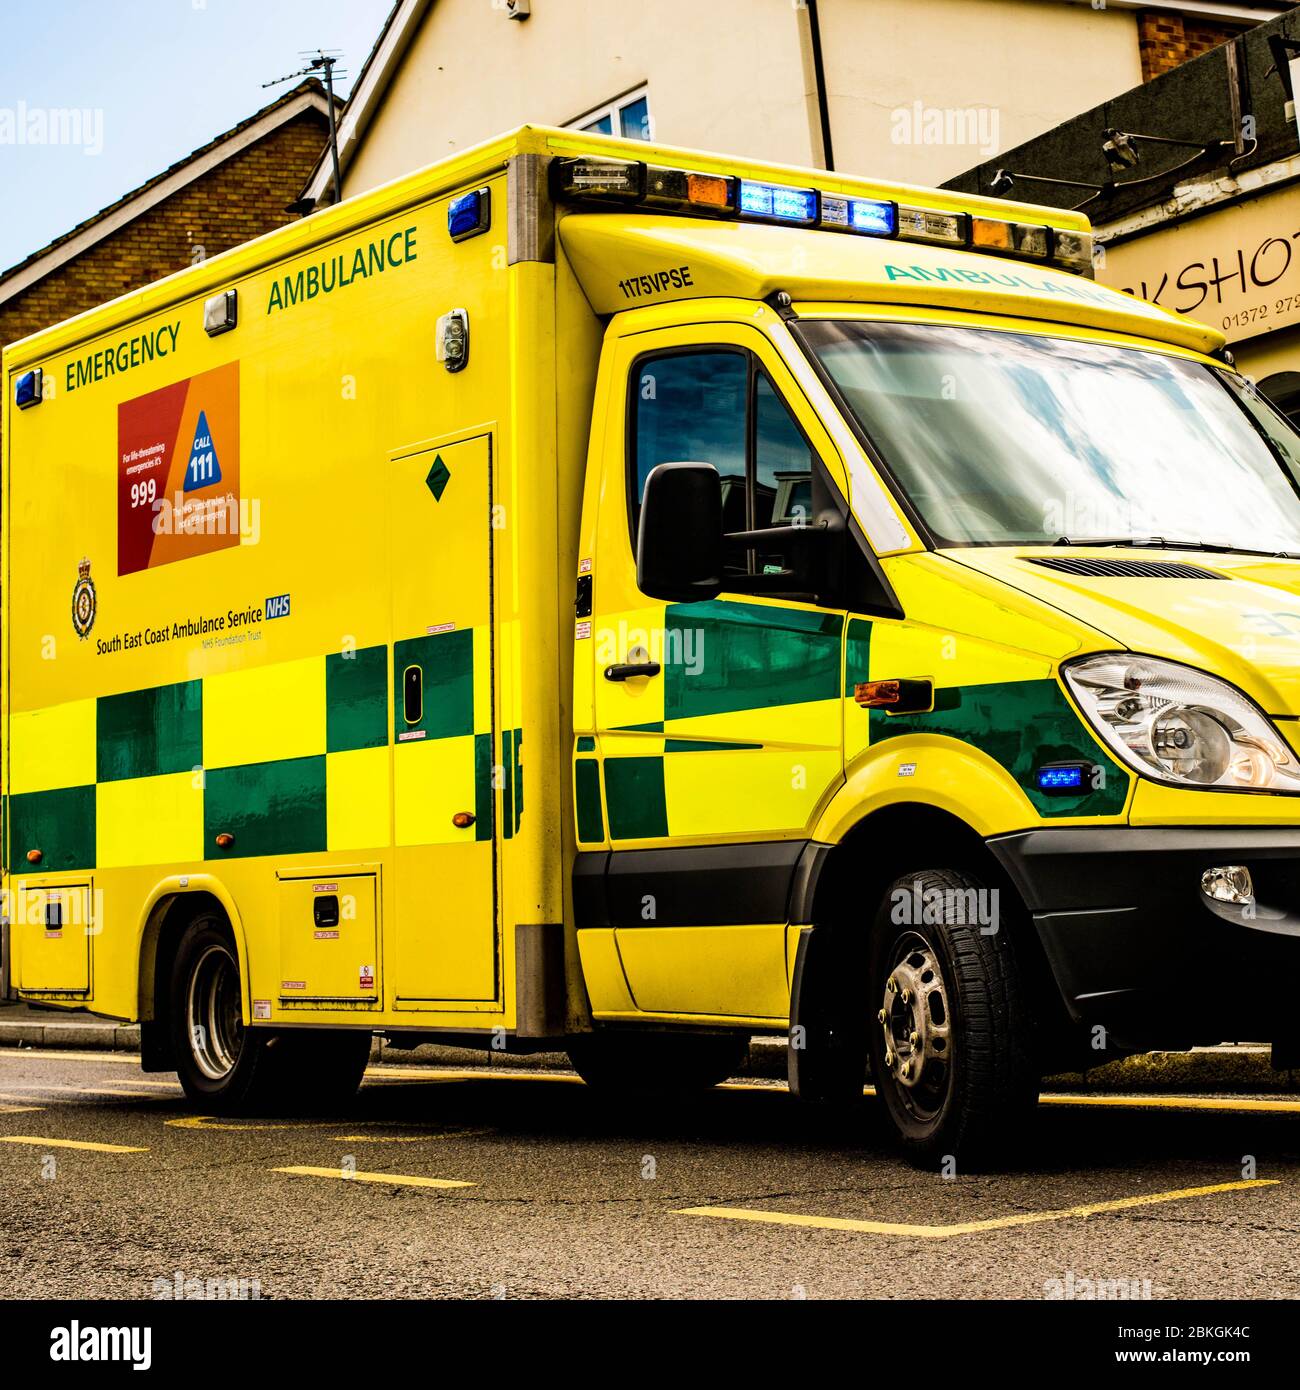 NHS Emergency Road Ambulance Attending An Incident In Surrey, UK Stock Photo